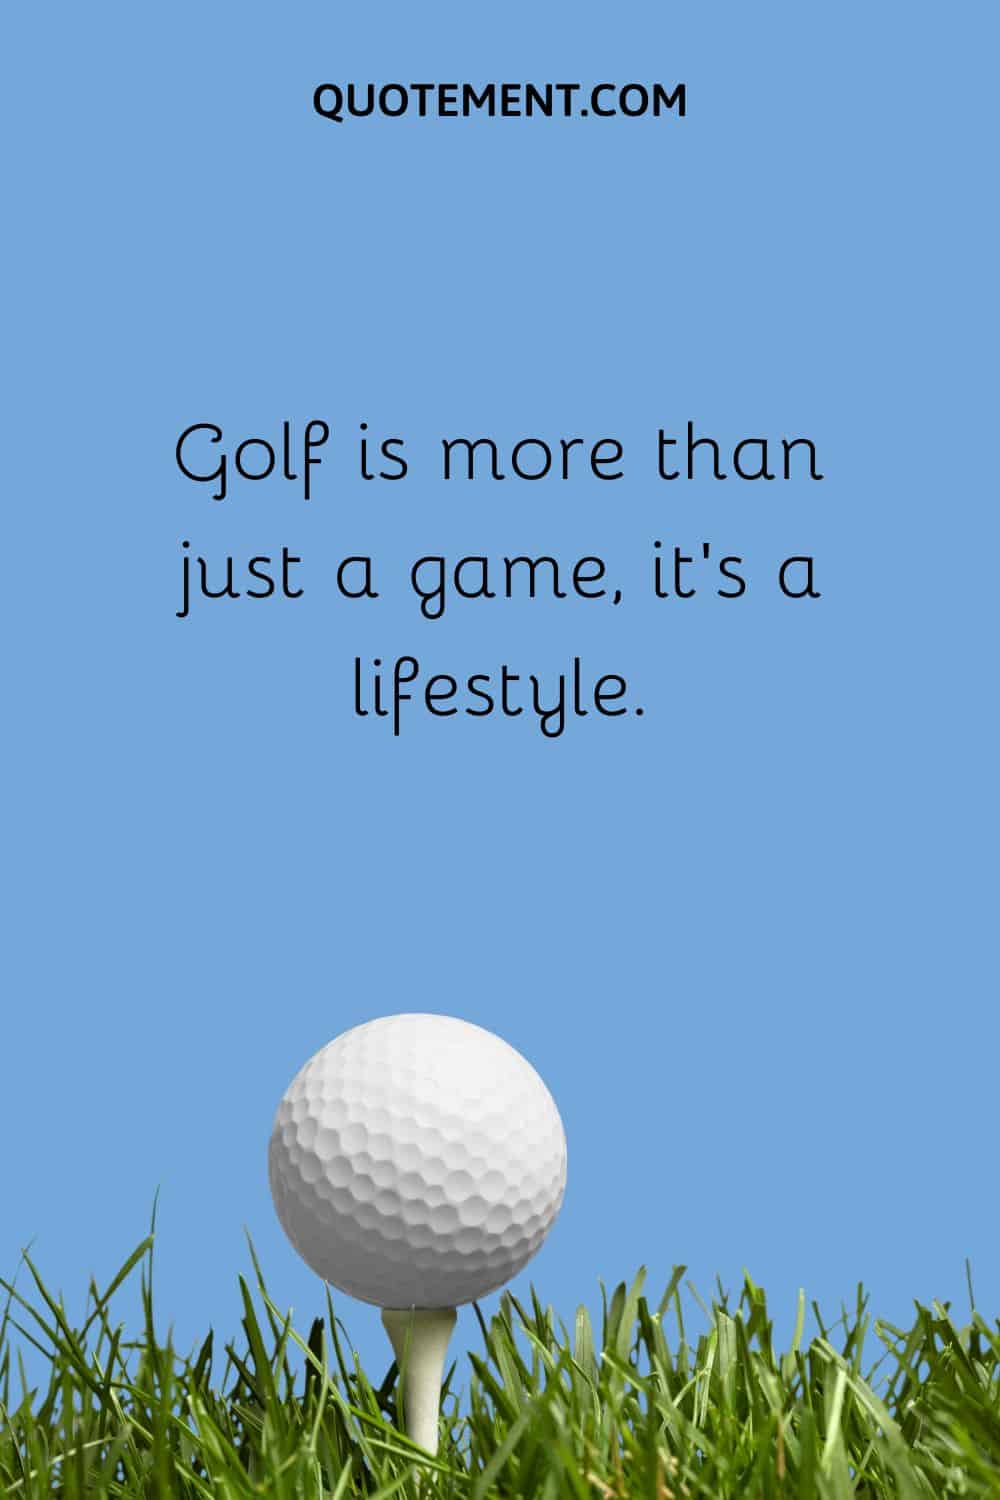 Golf is more than just a game, it's a lifestyle.